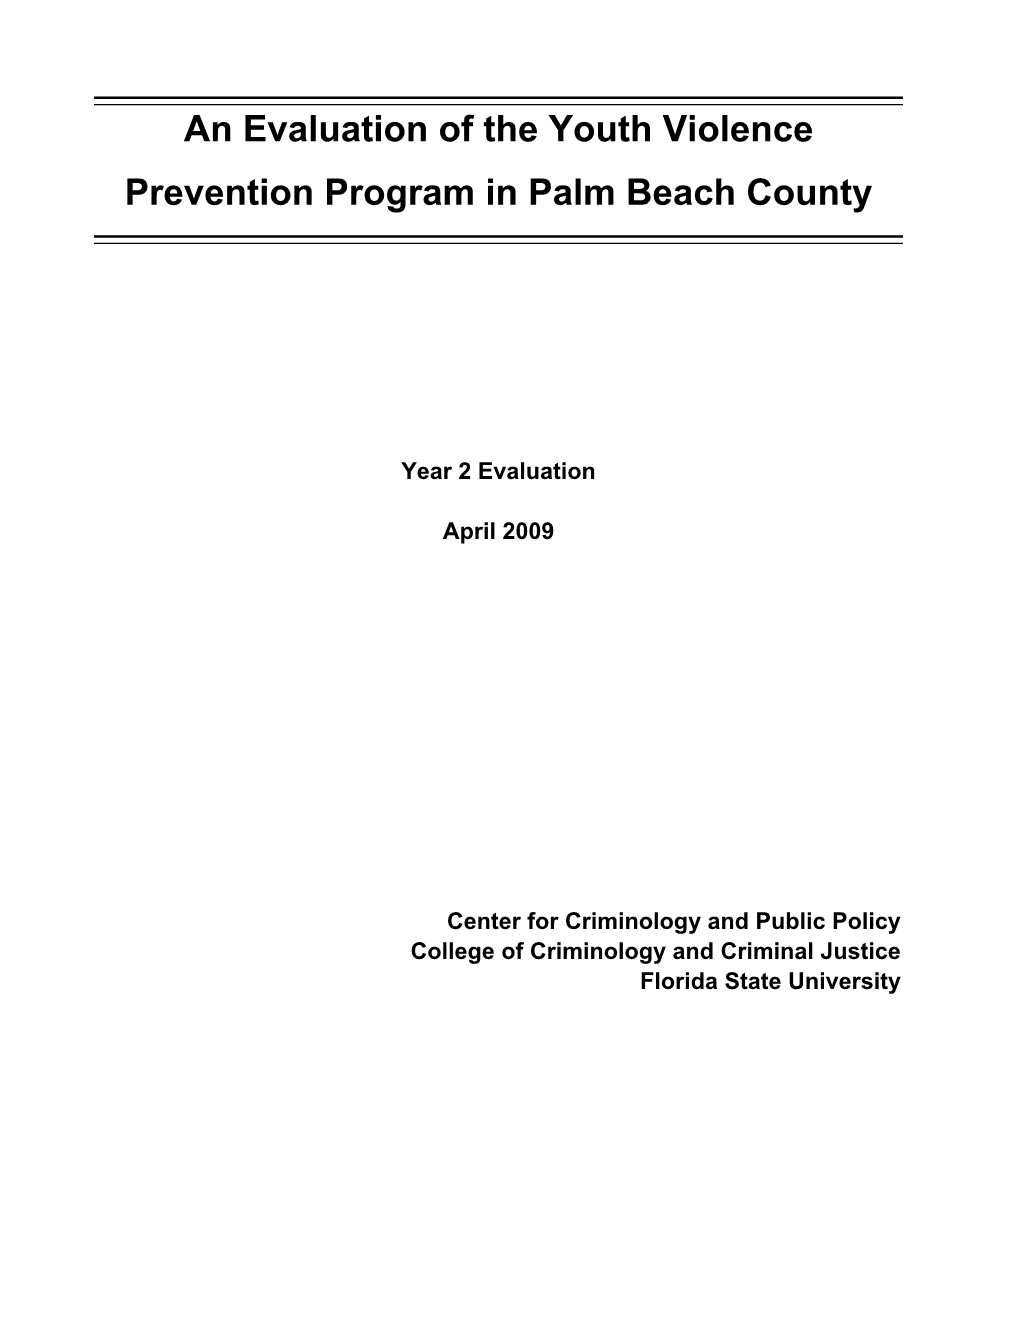 An Evaluation of the Youth Violence Prevention Program in Palm Beach County